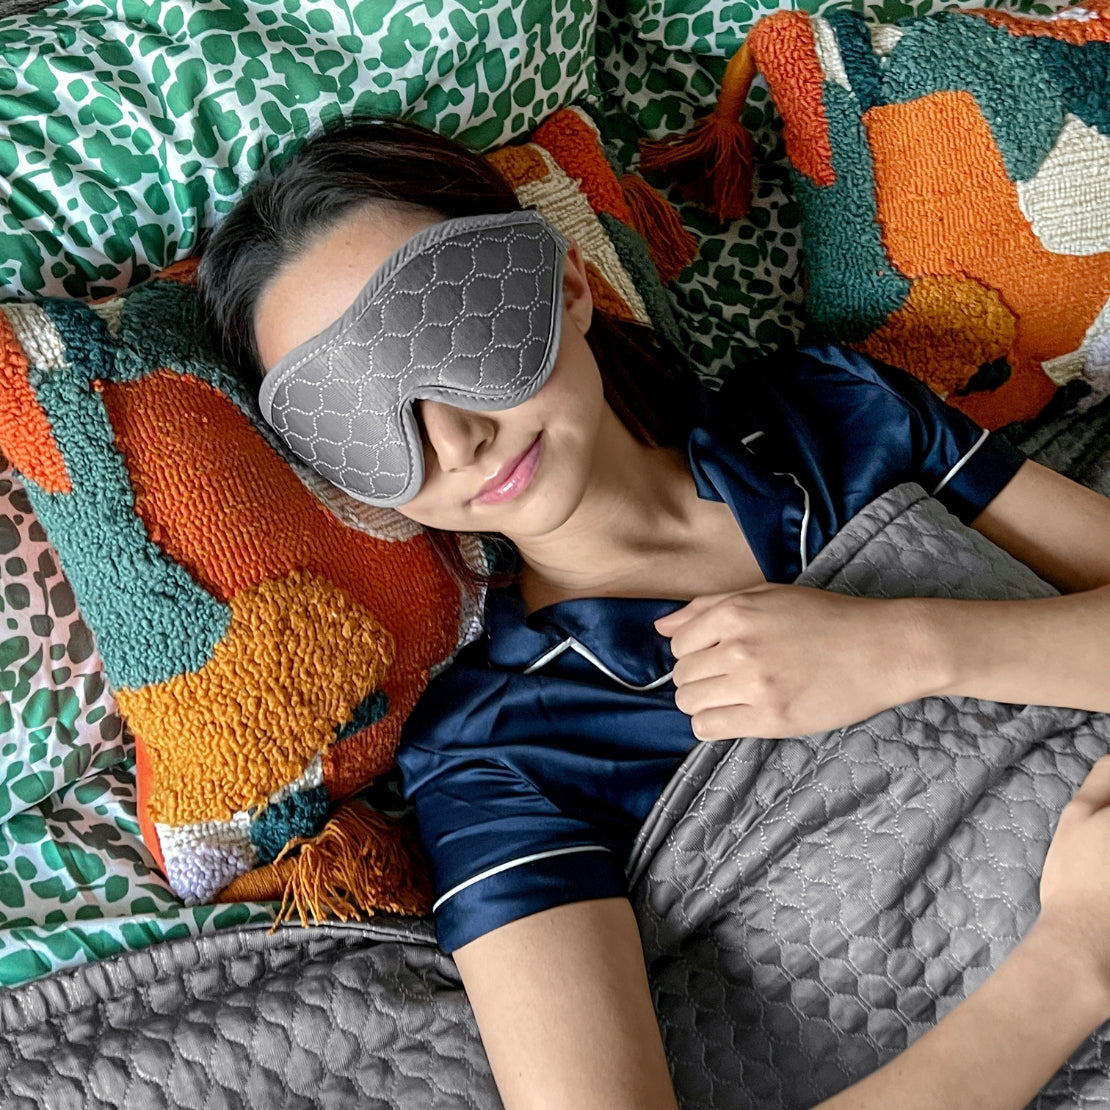 A person comfortably resting on a bed with a gray patterned HILU sleeping mask covering their eyes, surrounded by colorful and textured pillows.